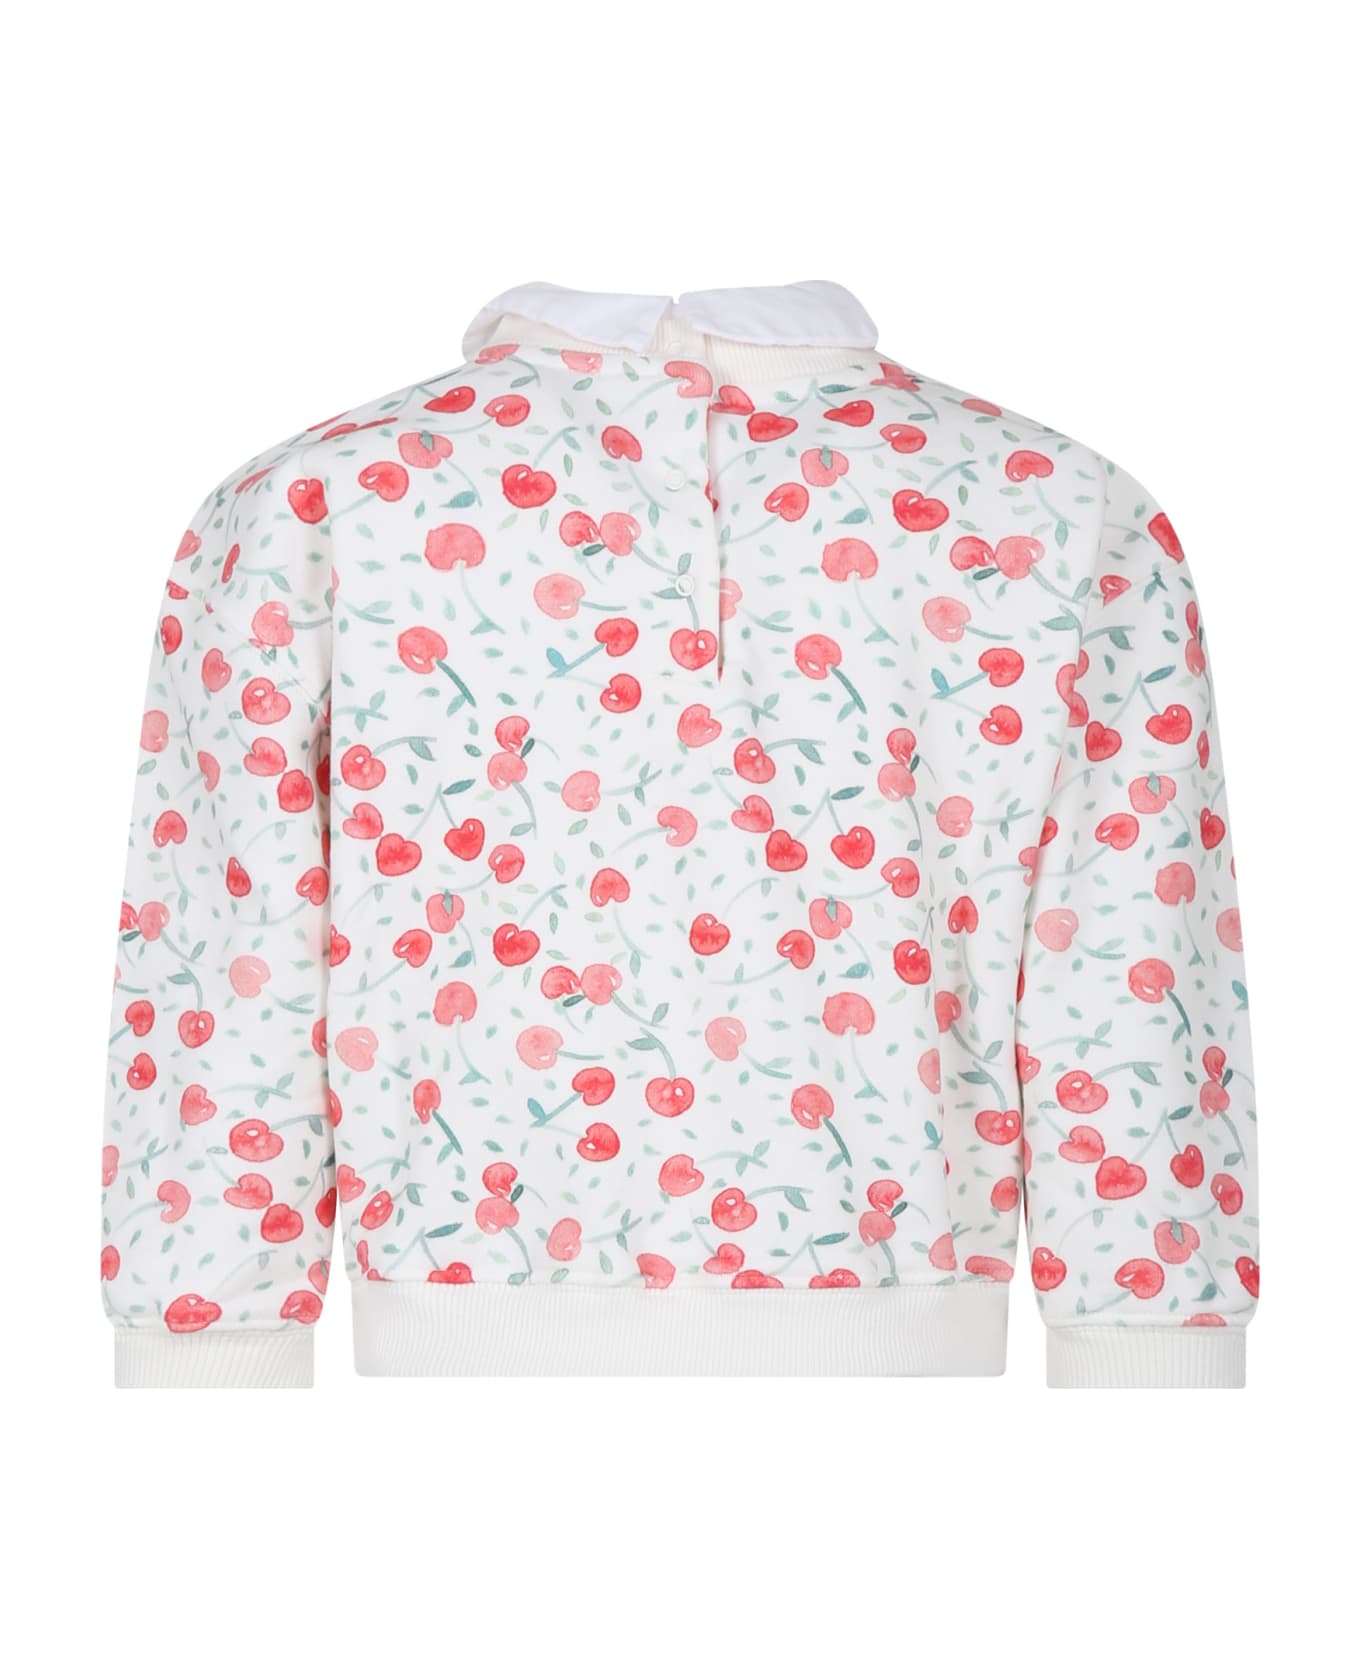 Bonpoint Ivory Sweatshirt For Girl With Iconic Cherries - Ivory